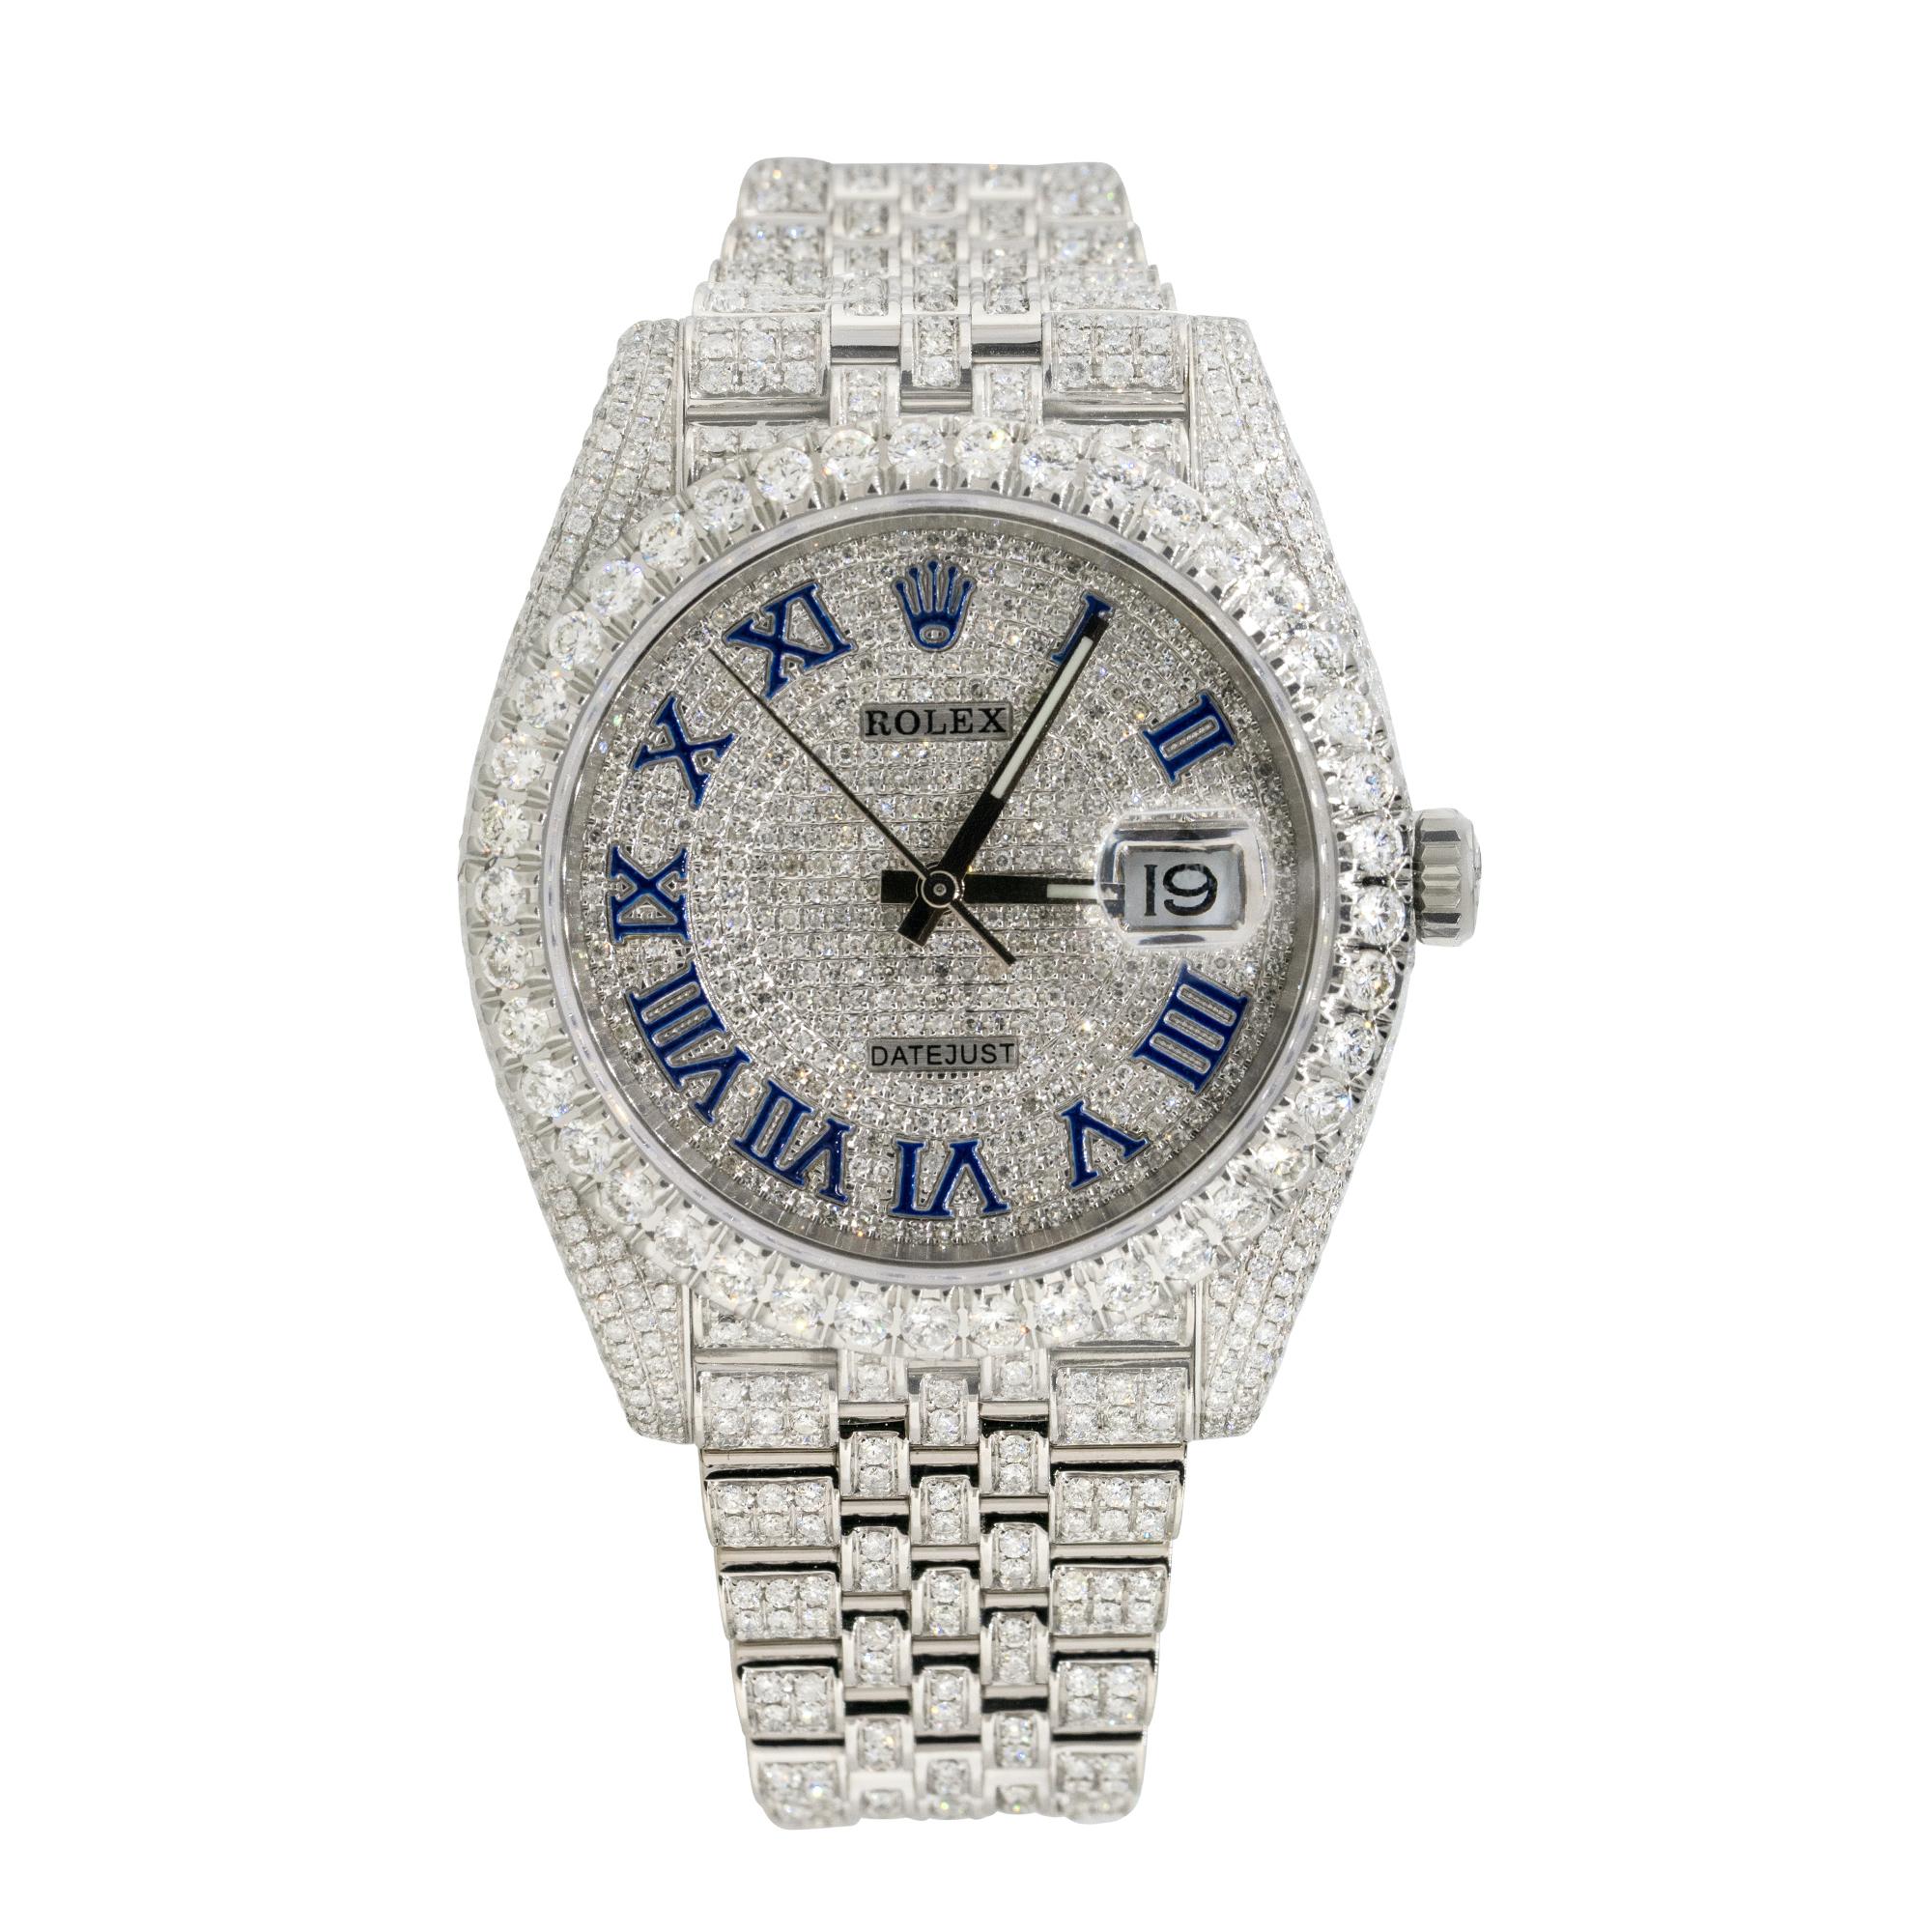 Brand: Rolex
MPN: 126300
Model: Datejust II
Case Material: Stainless steel with aftermarket Diamonds
Case Diameter: 41mm
Crystal: Sapphire Crystal
Bezel: Stainless steel bezel with aftermarket Diamonds
Dial: Dial with blue roman numerals covered in